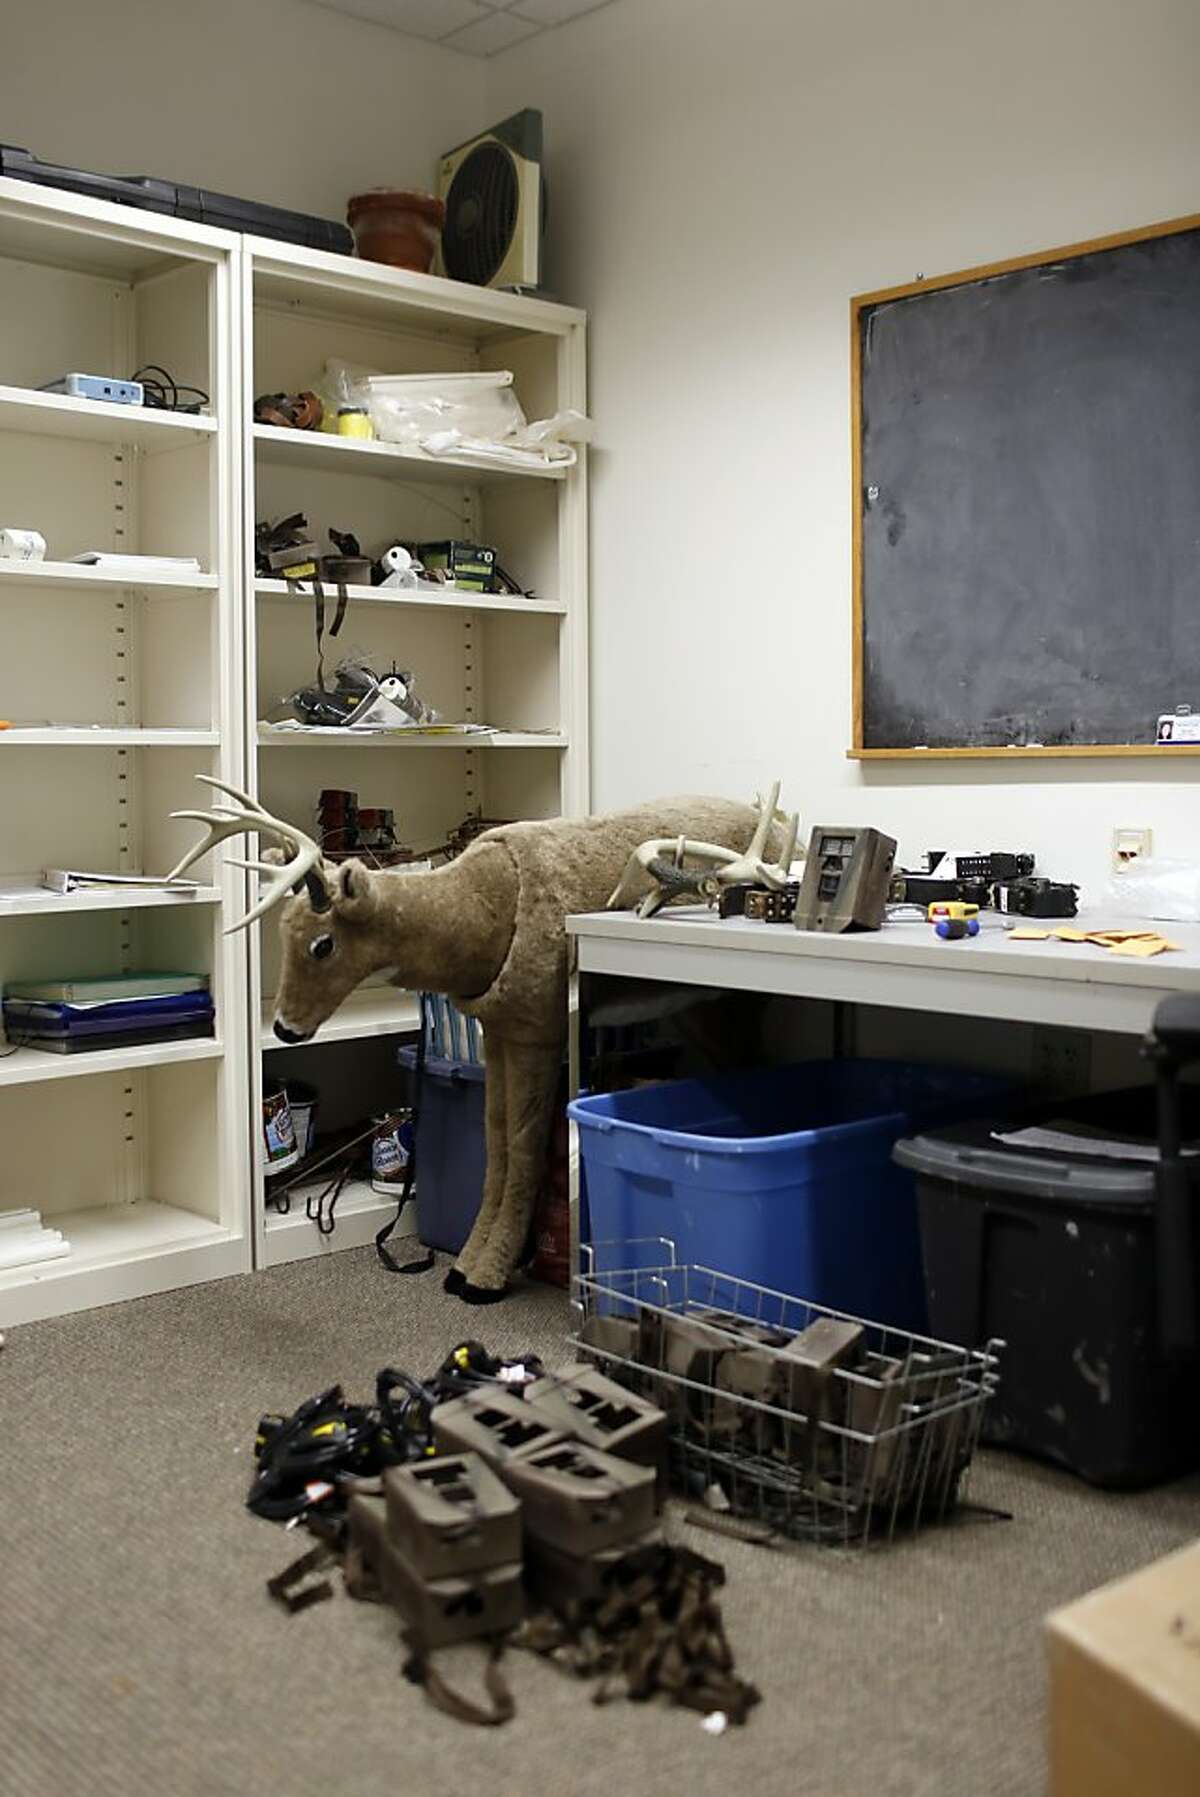 University of California Santa Cruz Associate Professor of Environmental Studies Chris Wilmer workroom filled with tools used to observe and track mountain lions on the UCSC campus in Santa Cruz, Calif. on June 24, 2013.